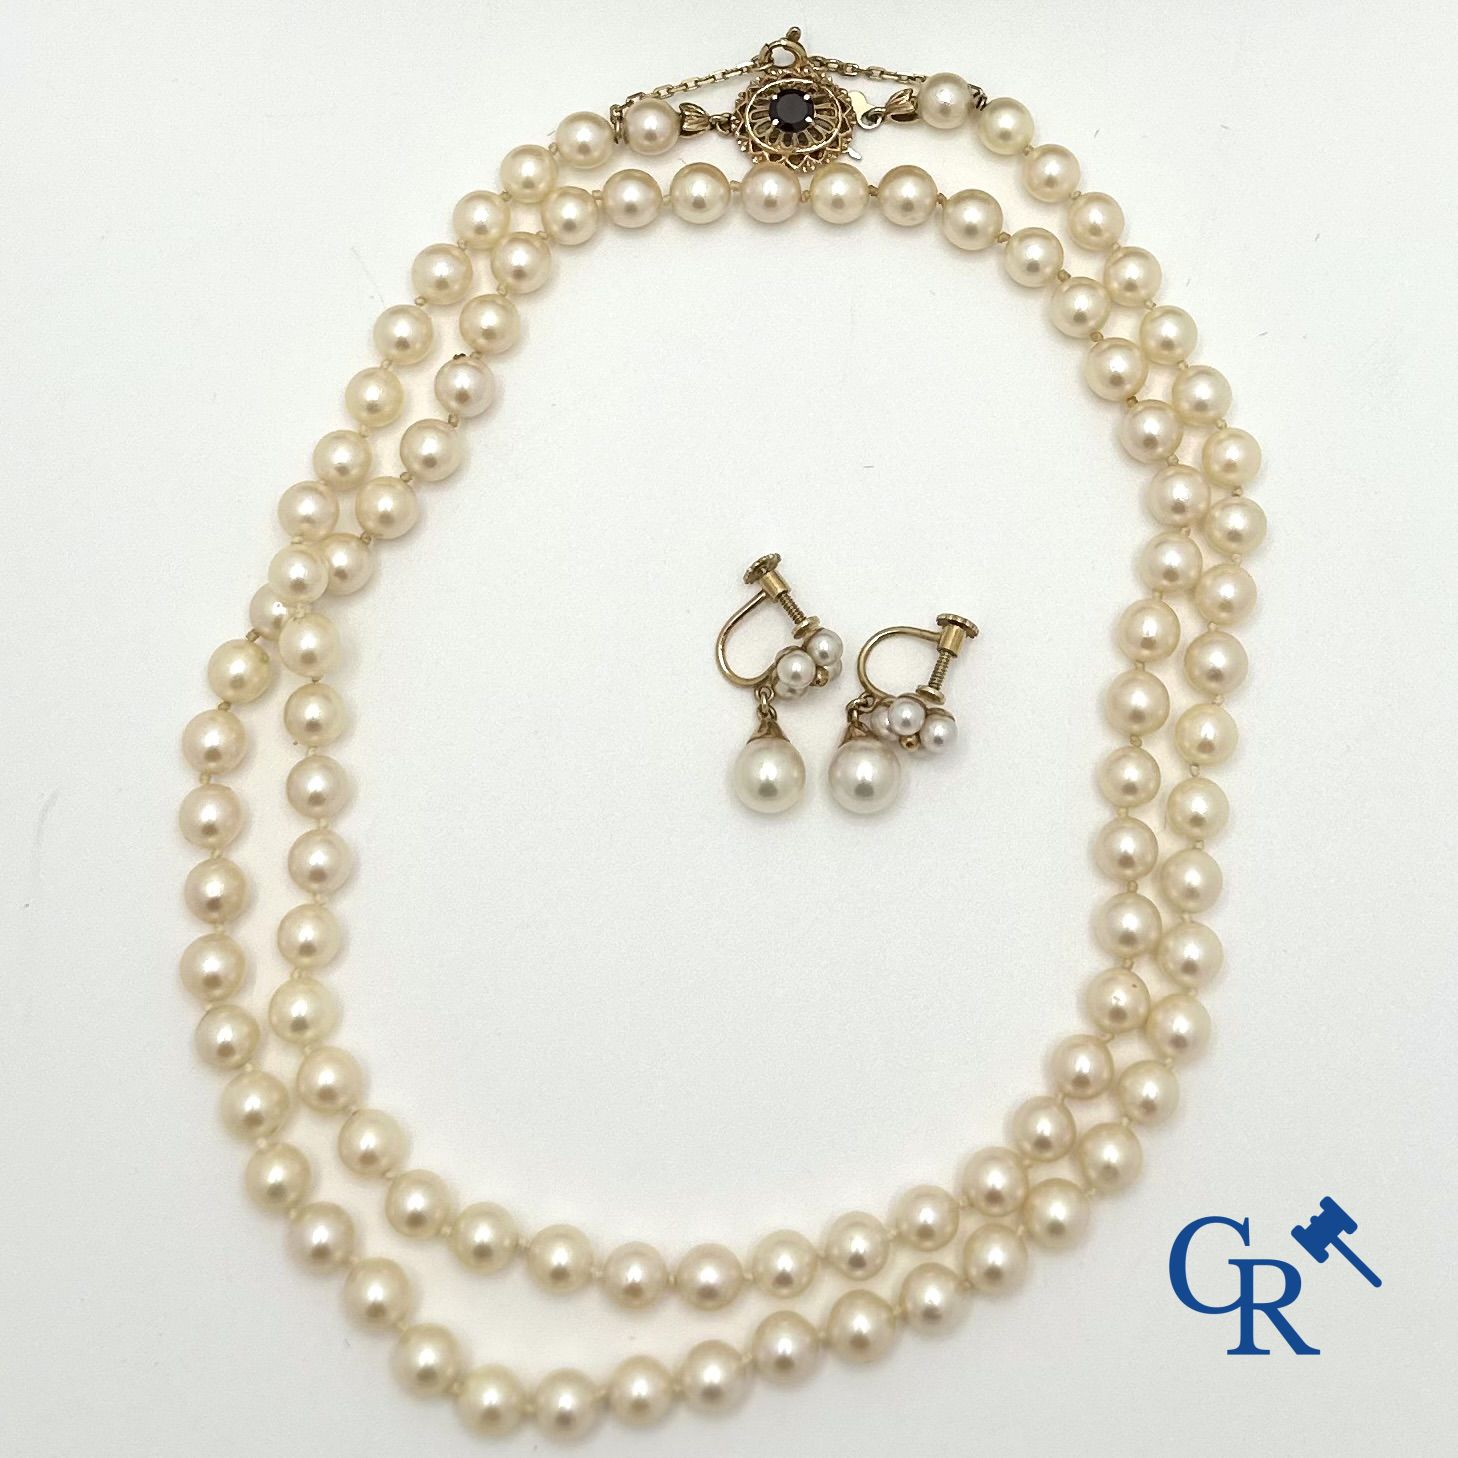 Jewellery: Lot consisting of a pearl necklace with gold clasp 18K and a pair of earrings in gold 18K.